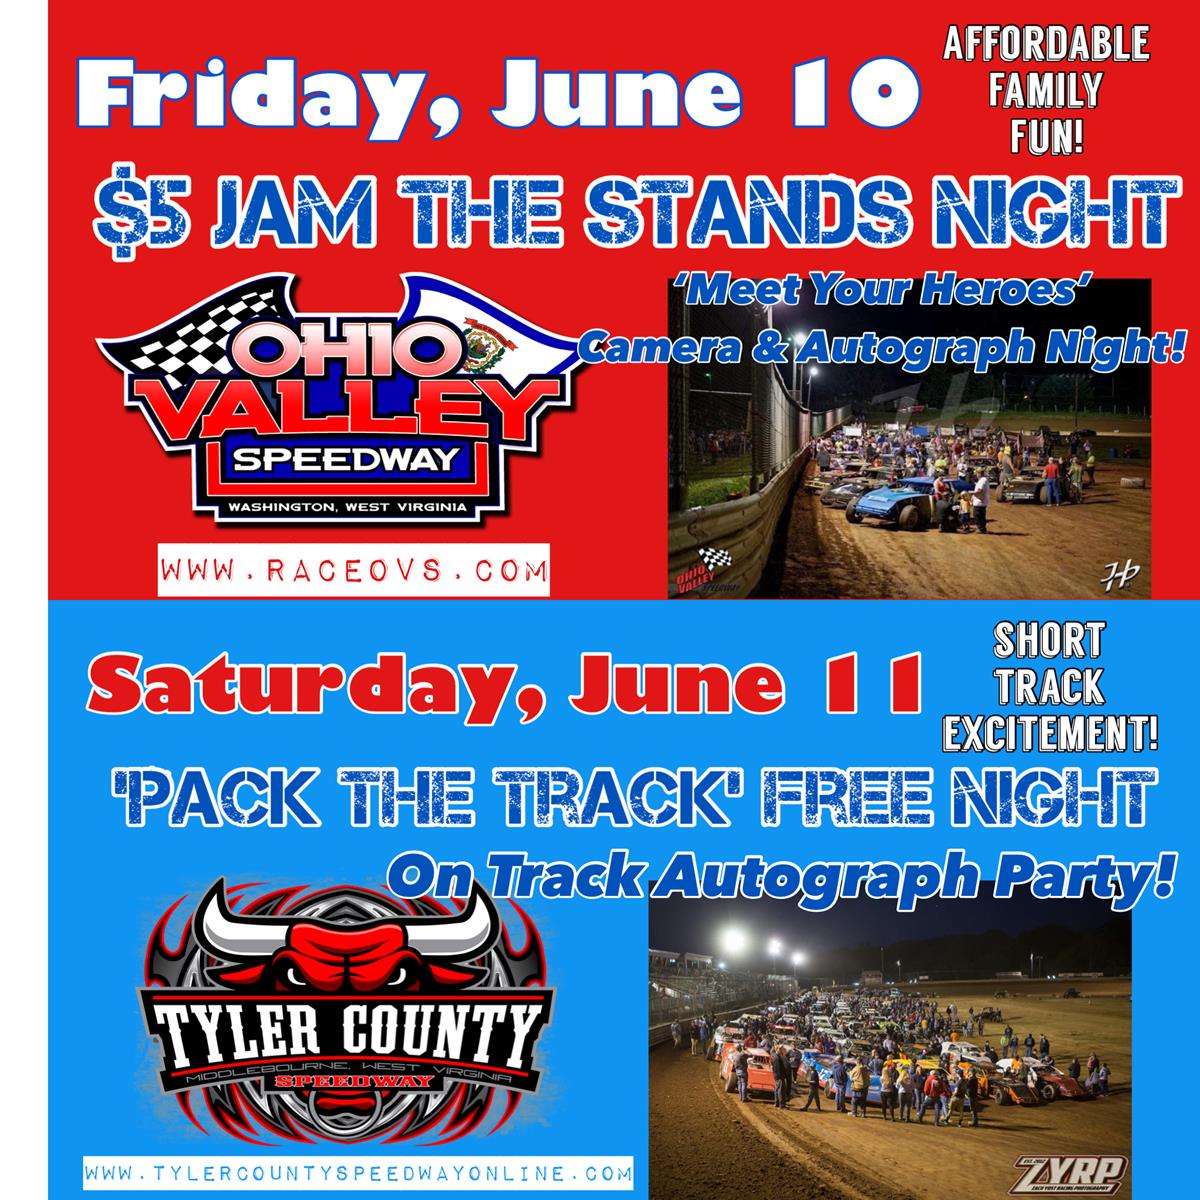 DOUBLE HEADER OF AFFORDABLE FAMILY FUN AT OHIO VALLEY &amp; TYLER COUNTY SPEEDWAY; A $5 BILL GETS YOU TWO NIGHTS OF RACING ACTION THIS WEEKEND!